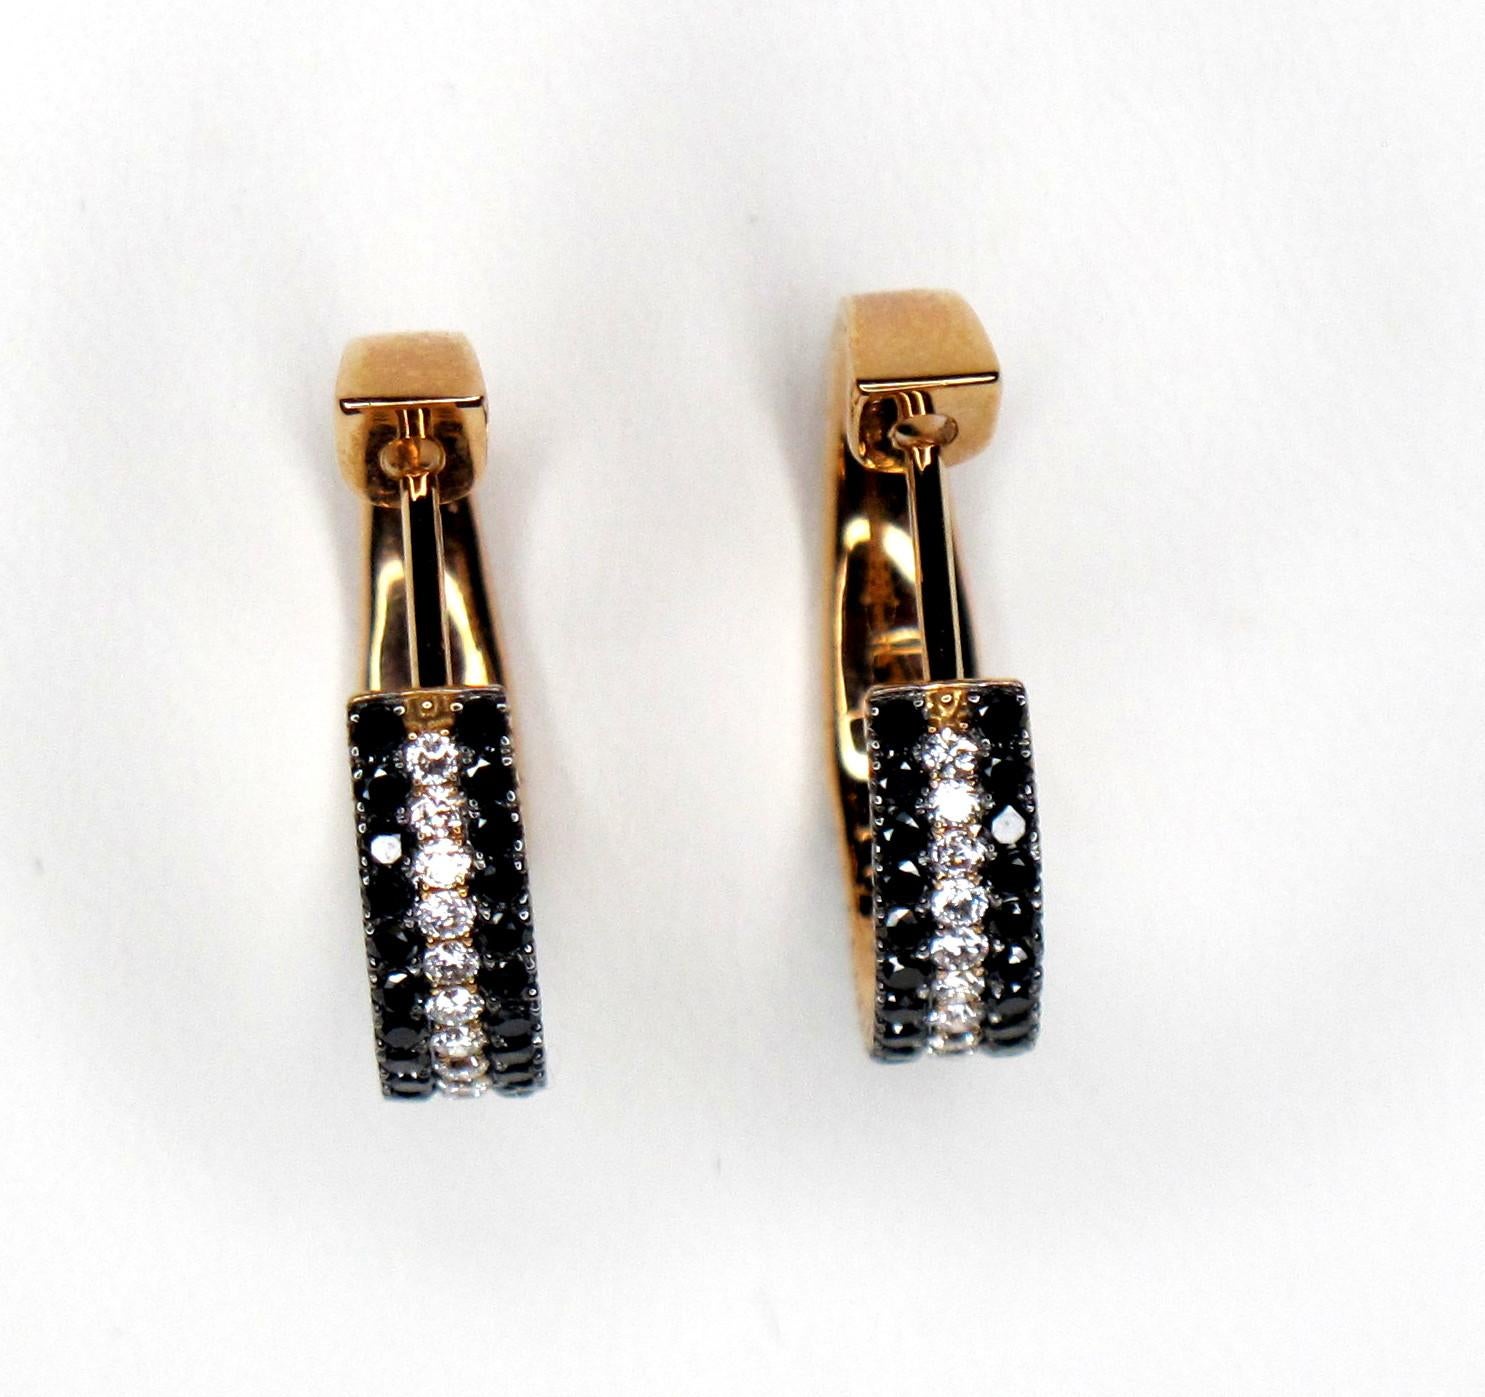 Both black and white diamonds are set in these unusual hoop style earrings. These diamonds are set in pink gold, which makes for a beautiful and unique color pairing. They are a tailored style with a modern twist!

Round brilliant cut diamonds, 1.28